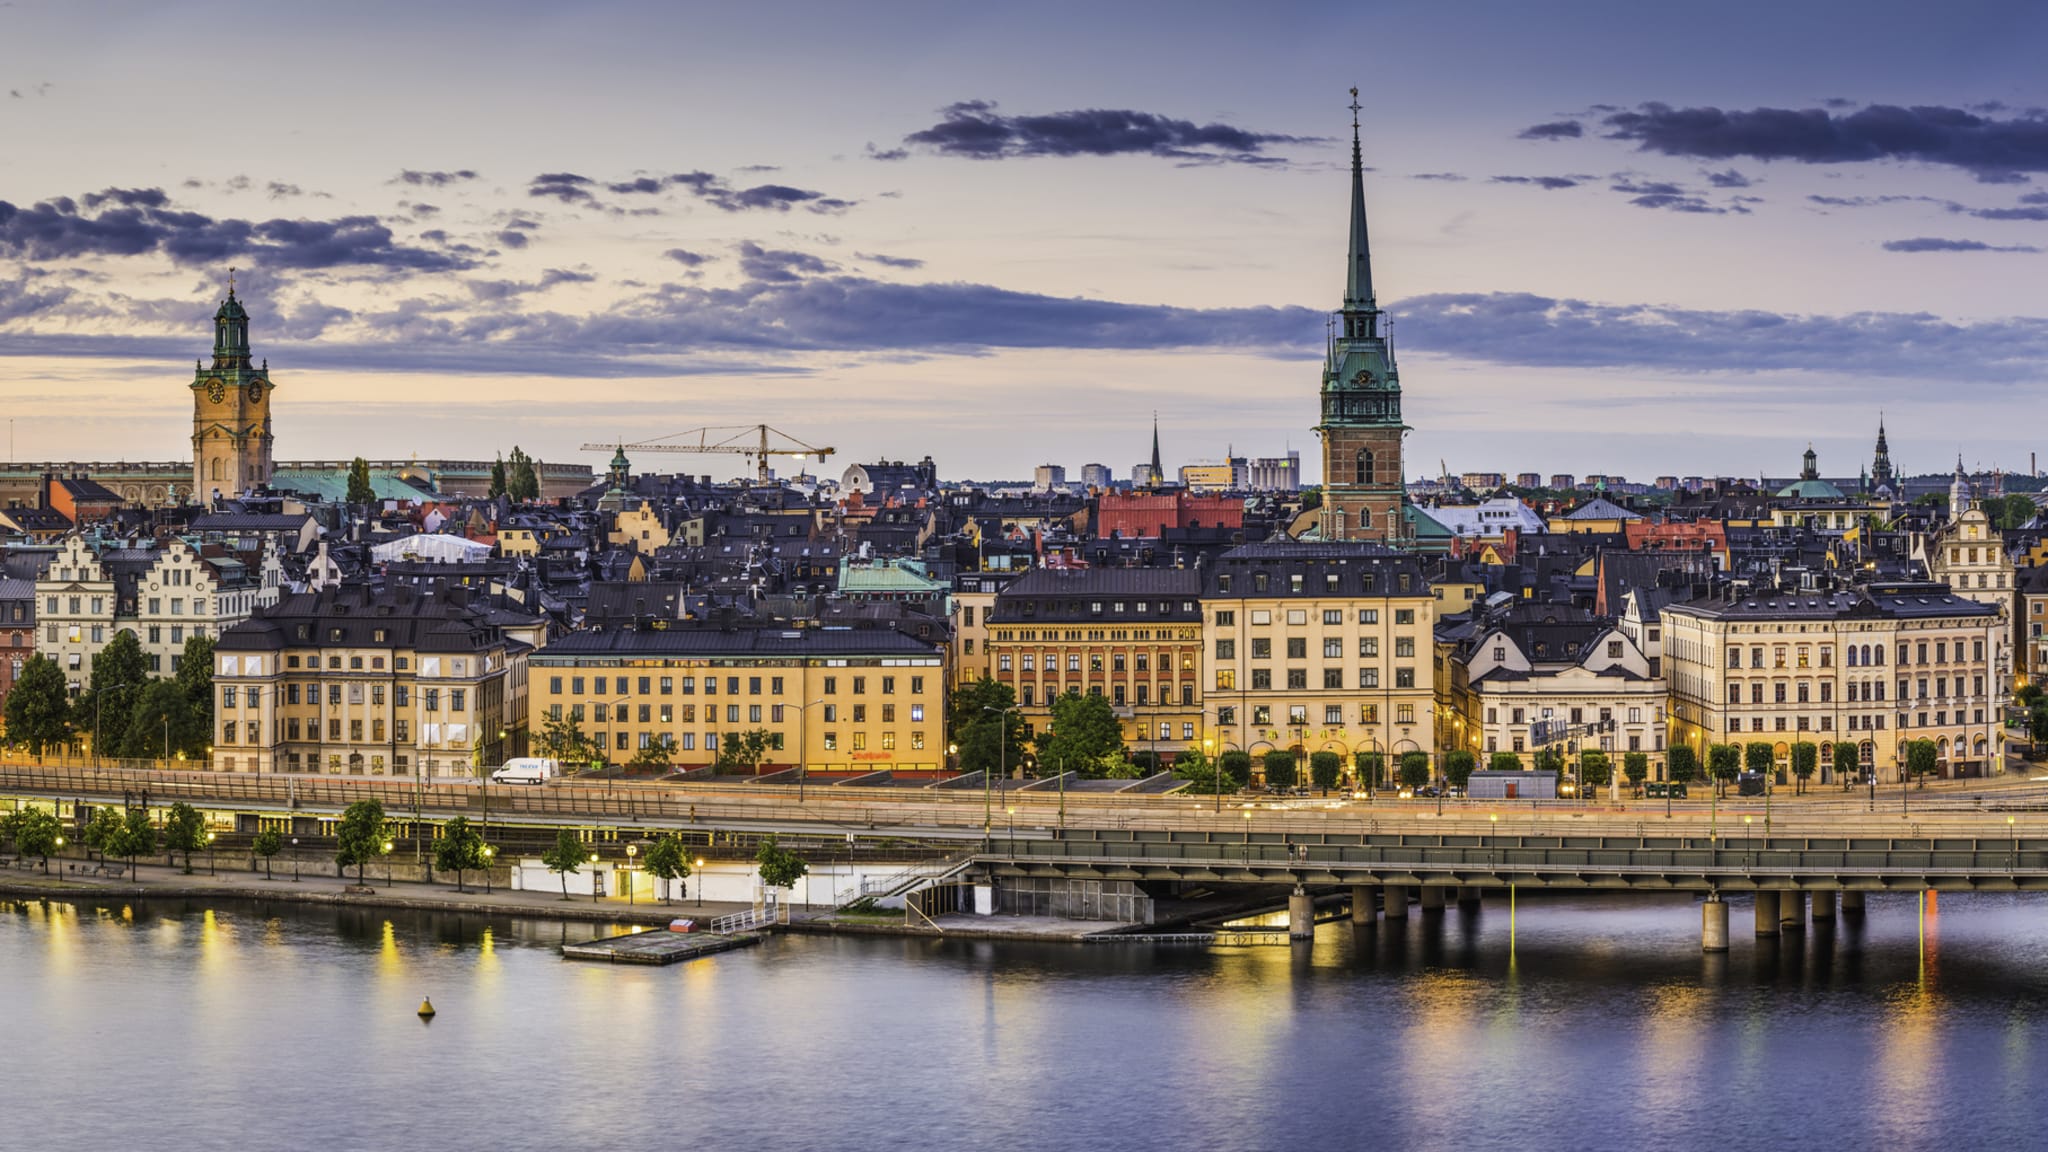 Gamla Stan, Stockholm ©fotoVoyager/E+ via Getty Images